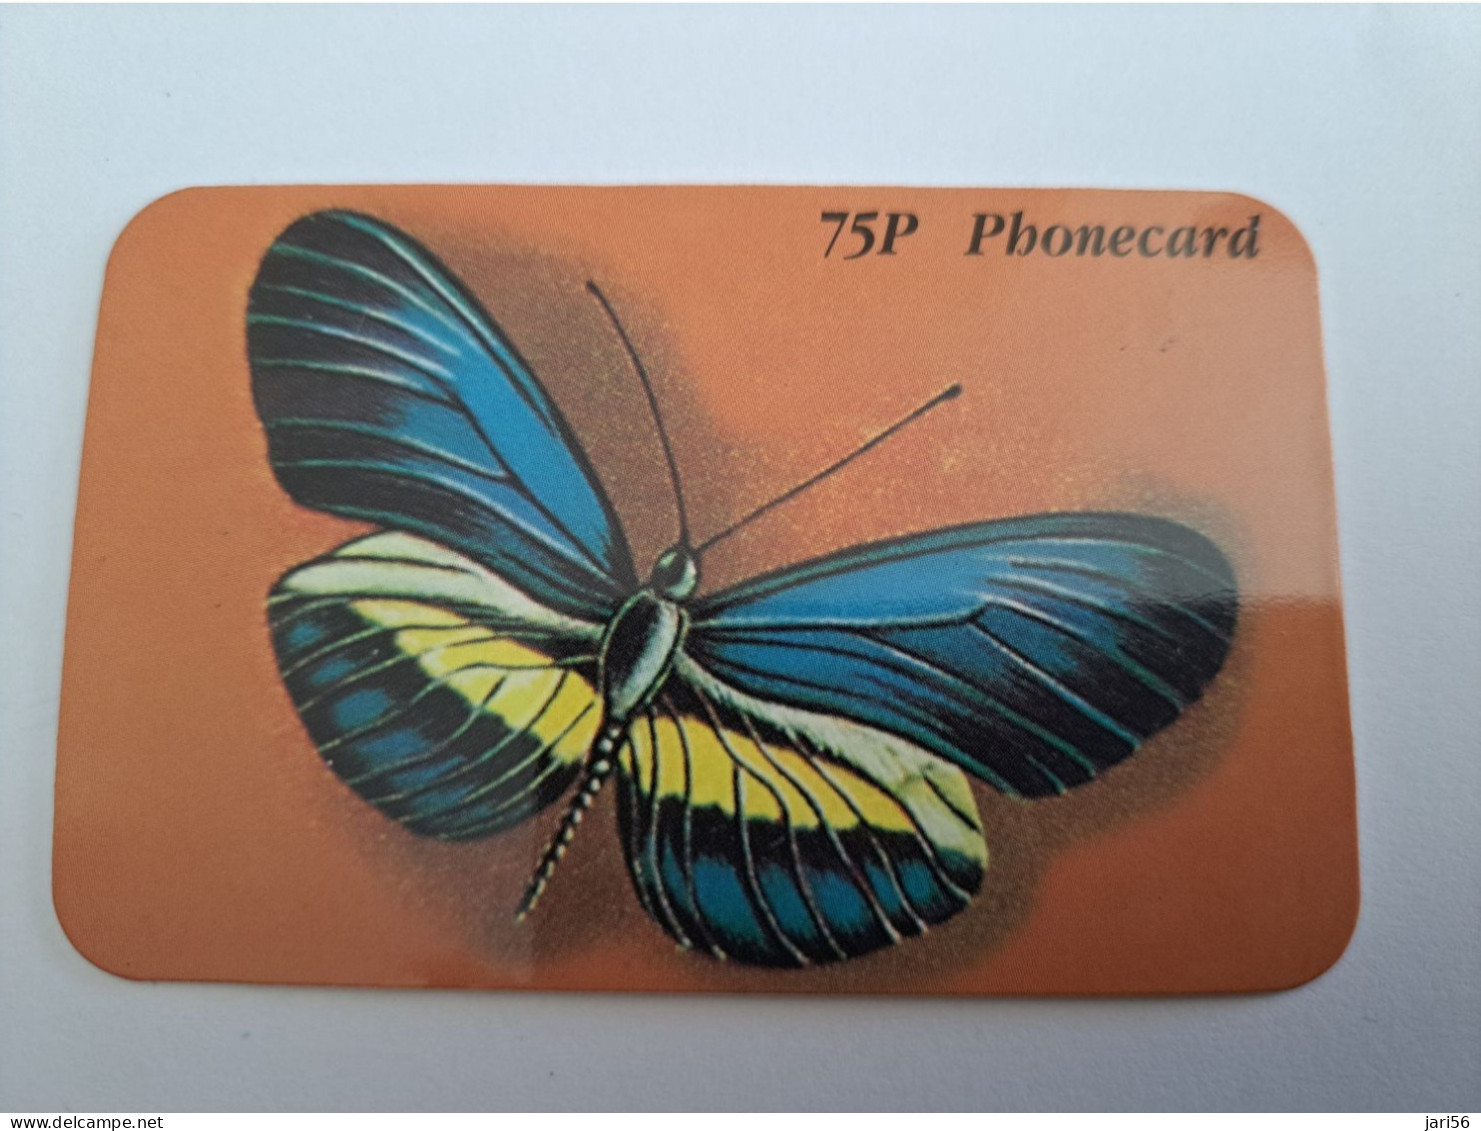 GREAT BRITAIN  / DISCOUNT PHONECARD/BUTTERFLY / 75 PENCE    PREPAID CARD / MINT      **13584** - Collections